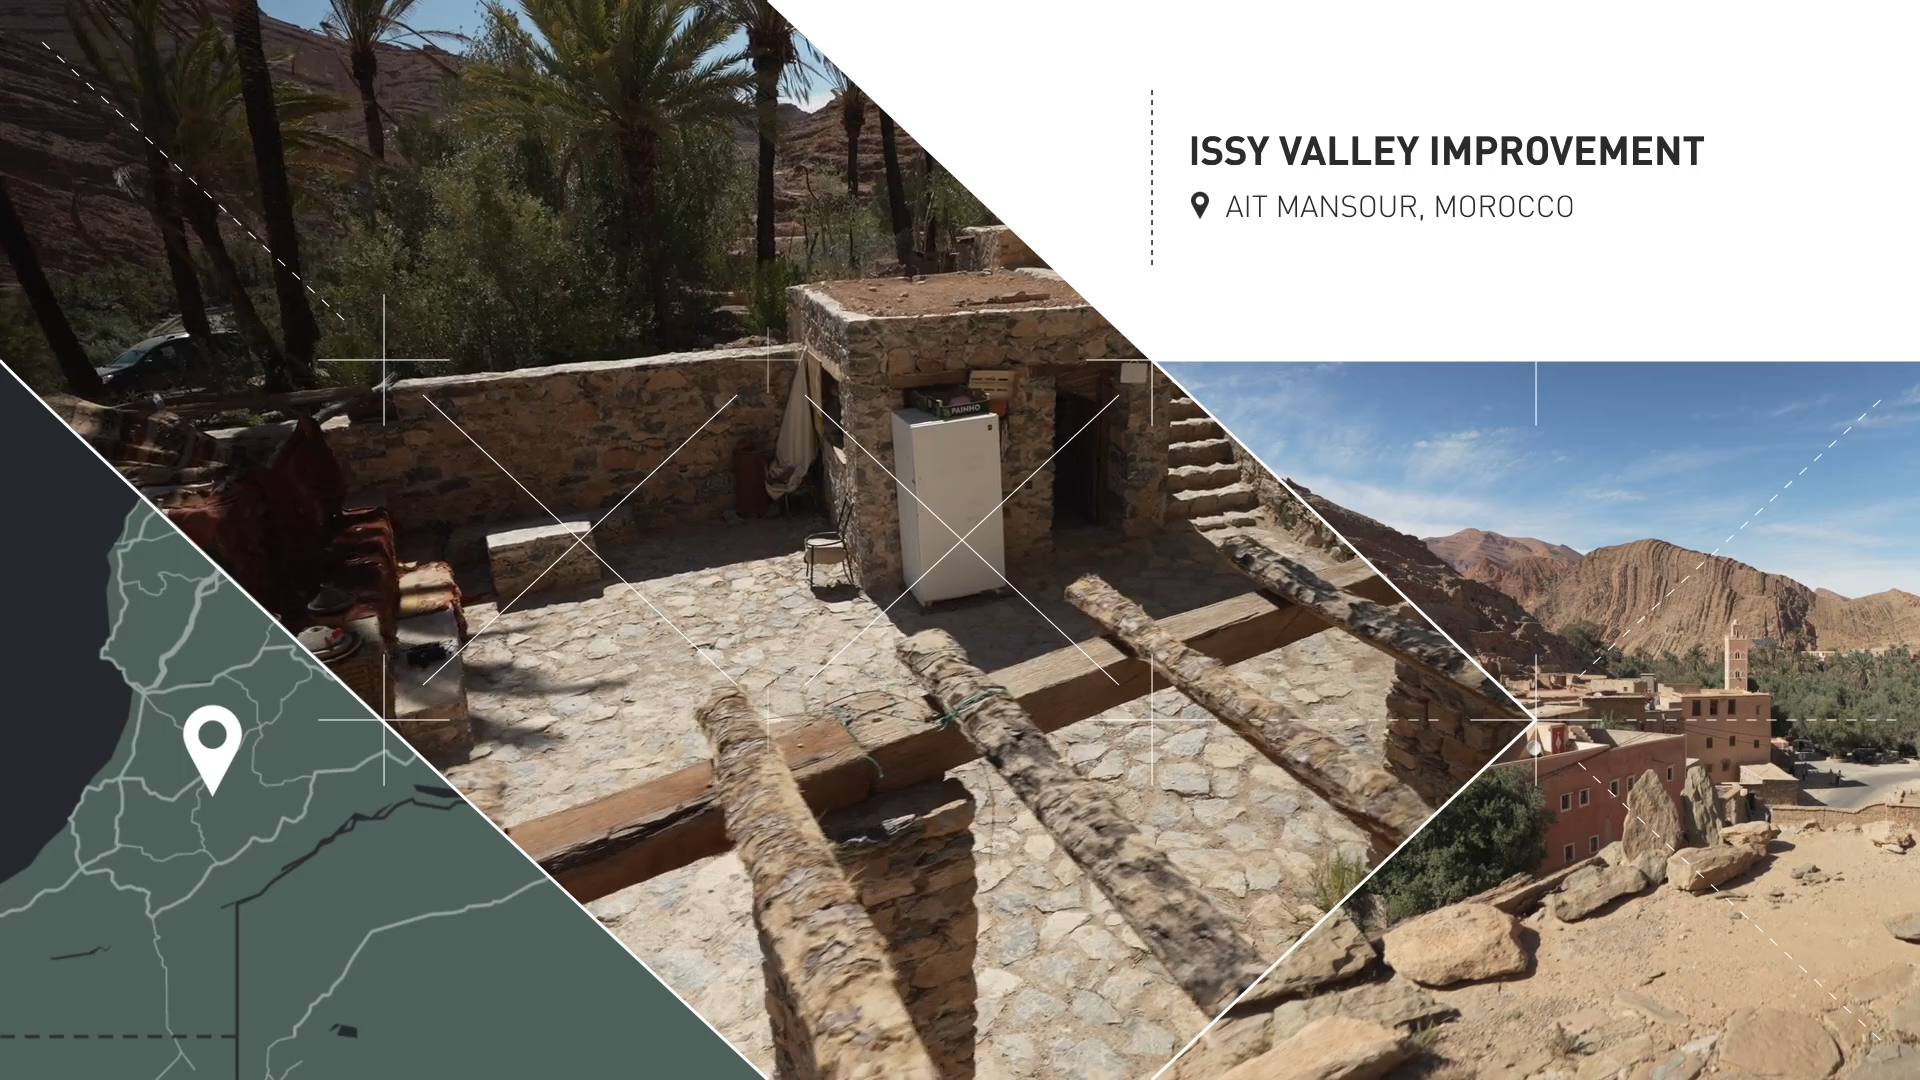 <p>Issy Valley Improvement,&nbsp;Ait Mansour, Morocco, by Salima Naji &amp; Inside Outside:&nbsp;While improving the palm orchards and water reservoirs, trails and facilities for tourists were also upgraded in the first phase of a larger project for the valley.</p>